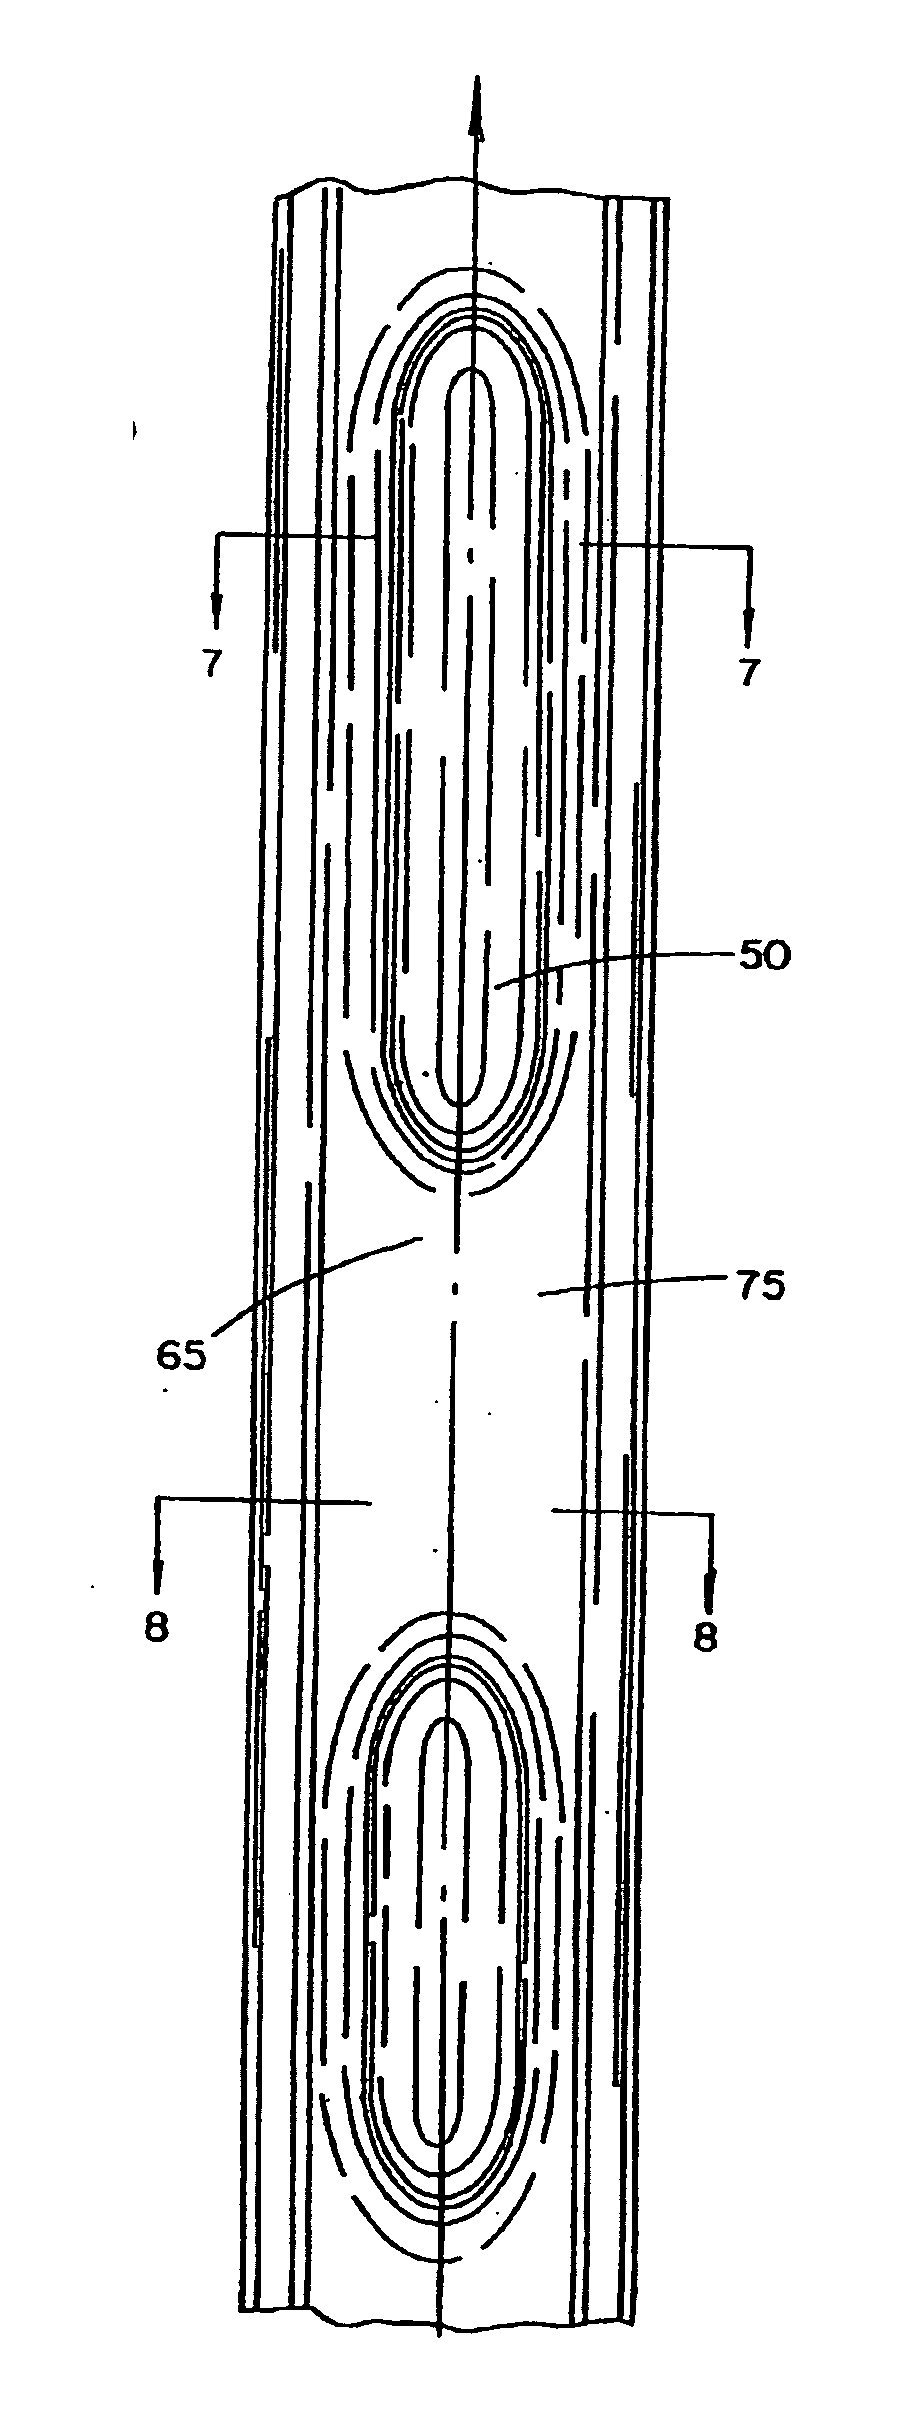 Configuration of three-dimensional features in data recording structures